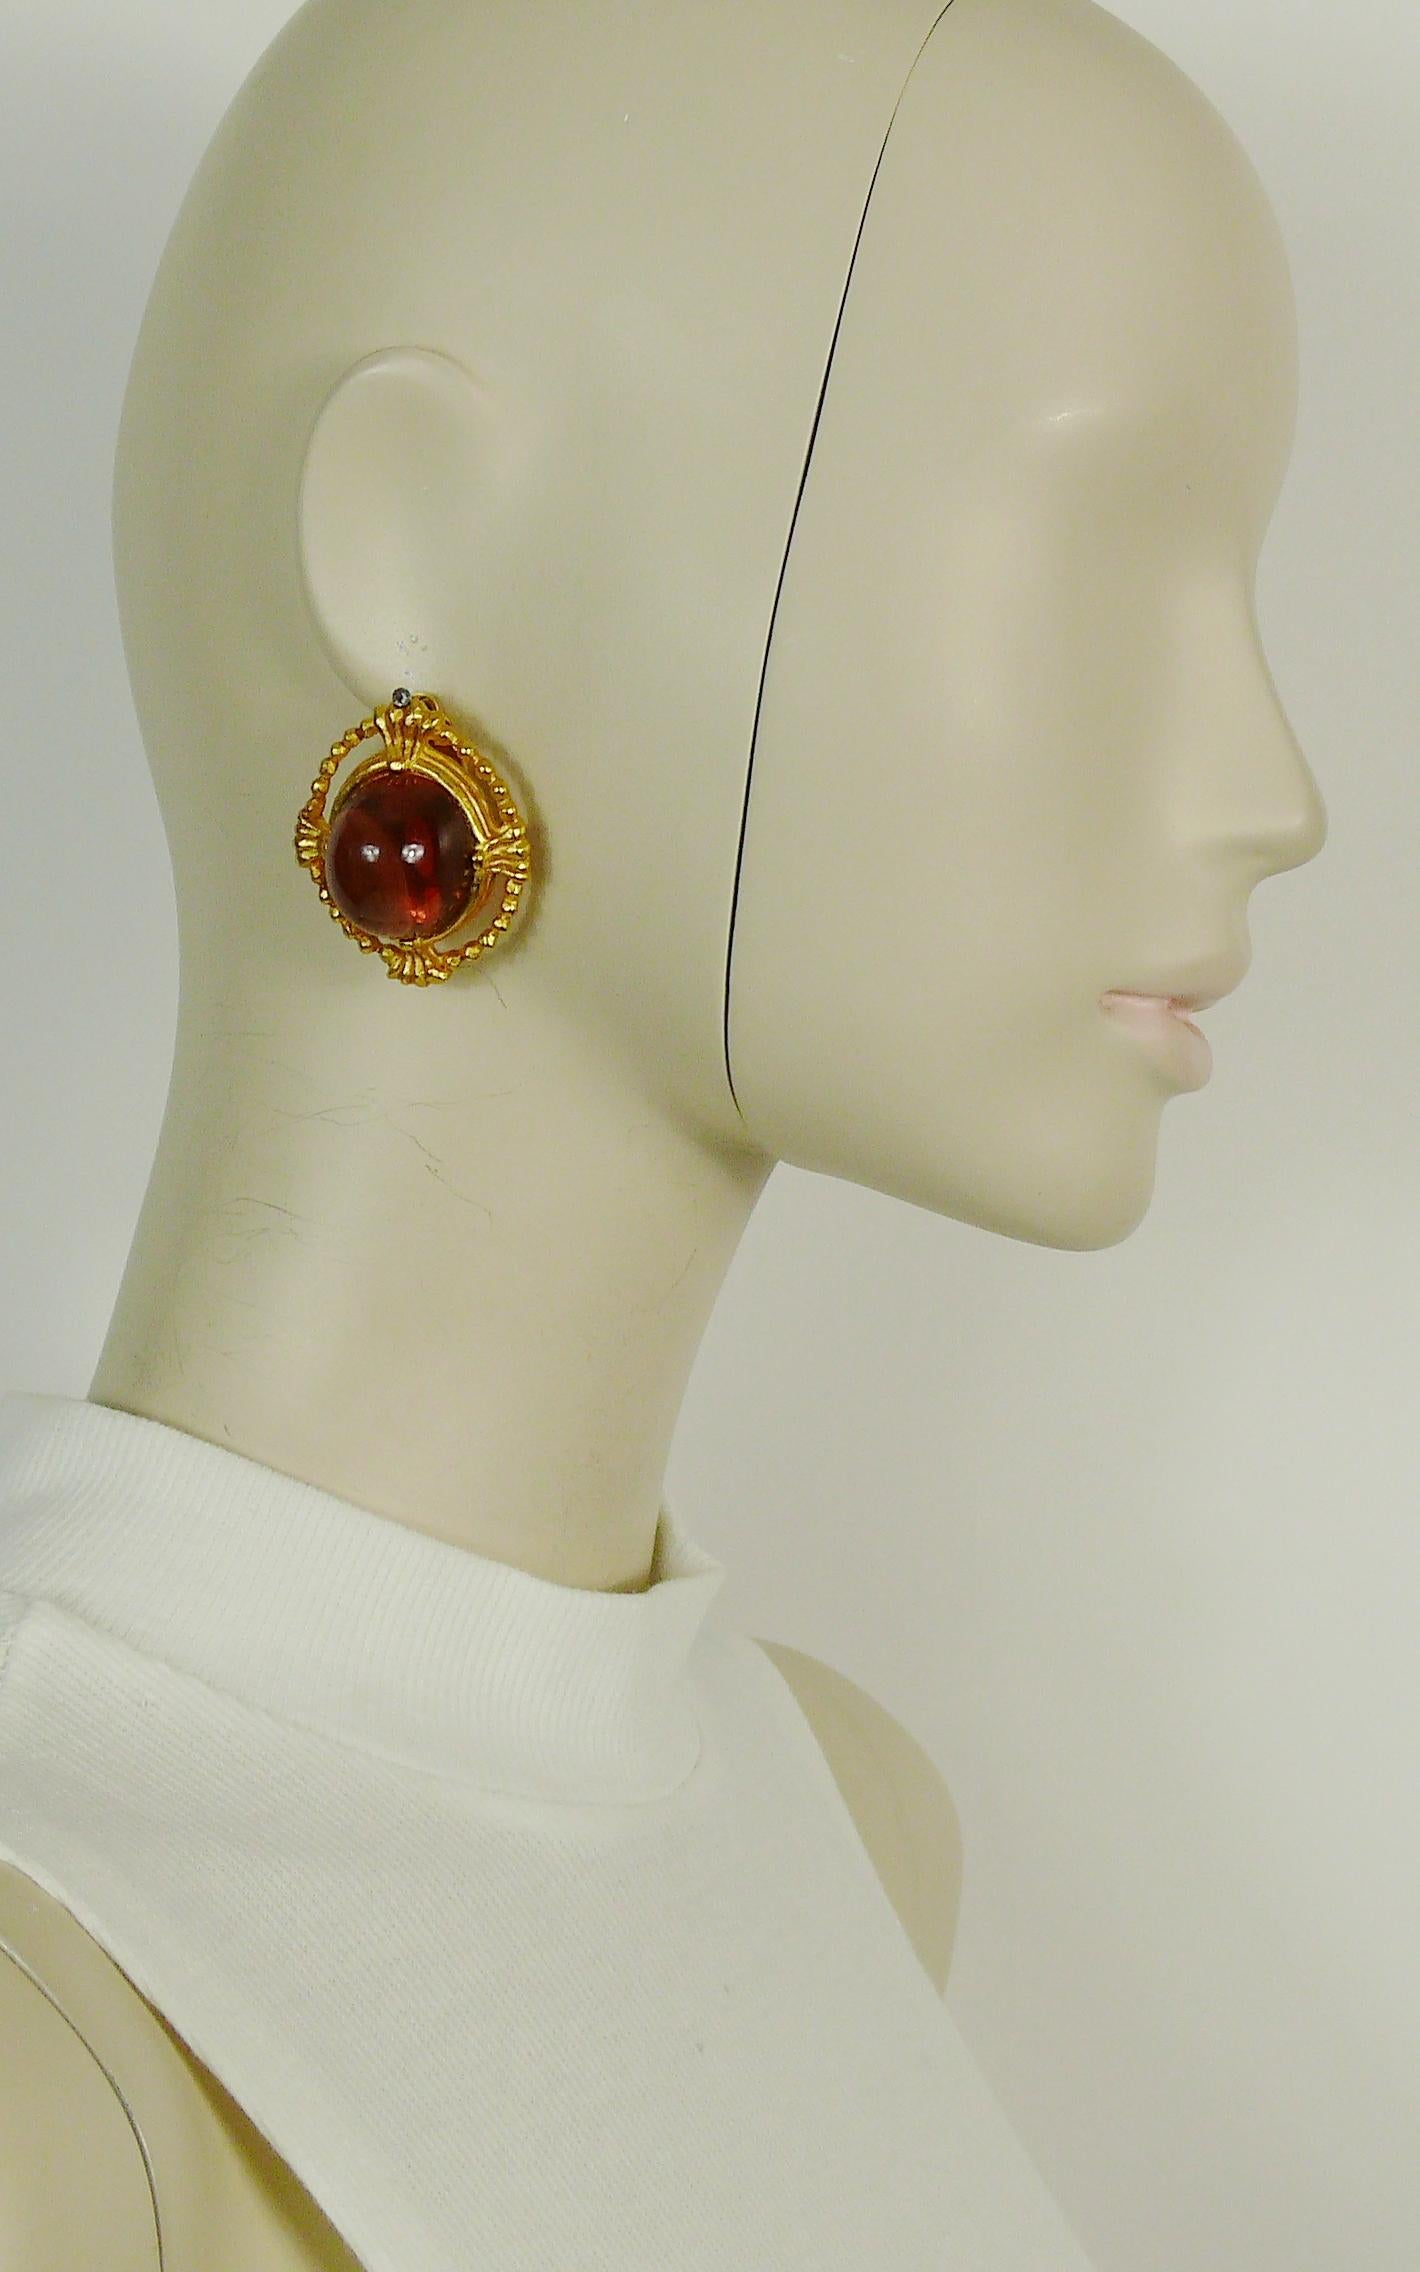 KARL LAGERFELD vintage massive gold toned clip-on earrings featuring a large domed resin cabochon.

IMPORTANT INFORMATION 
Please note that the colour of each resin cabochon is different, as per original manufacturing.

Embossed KL.

Indicative